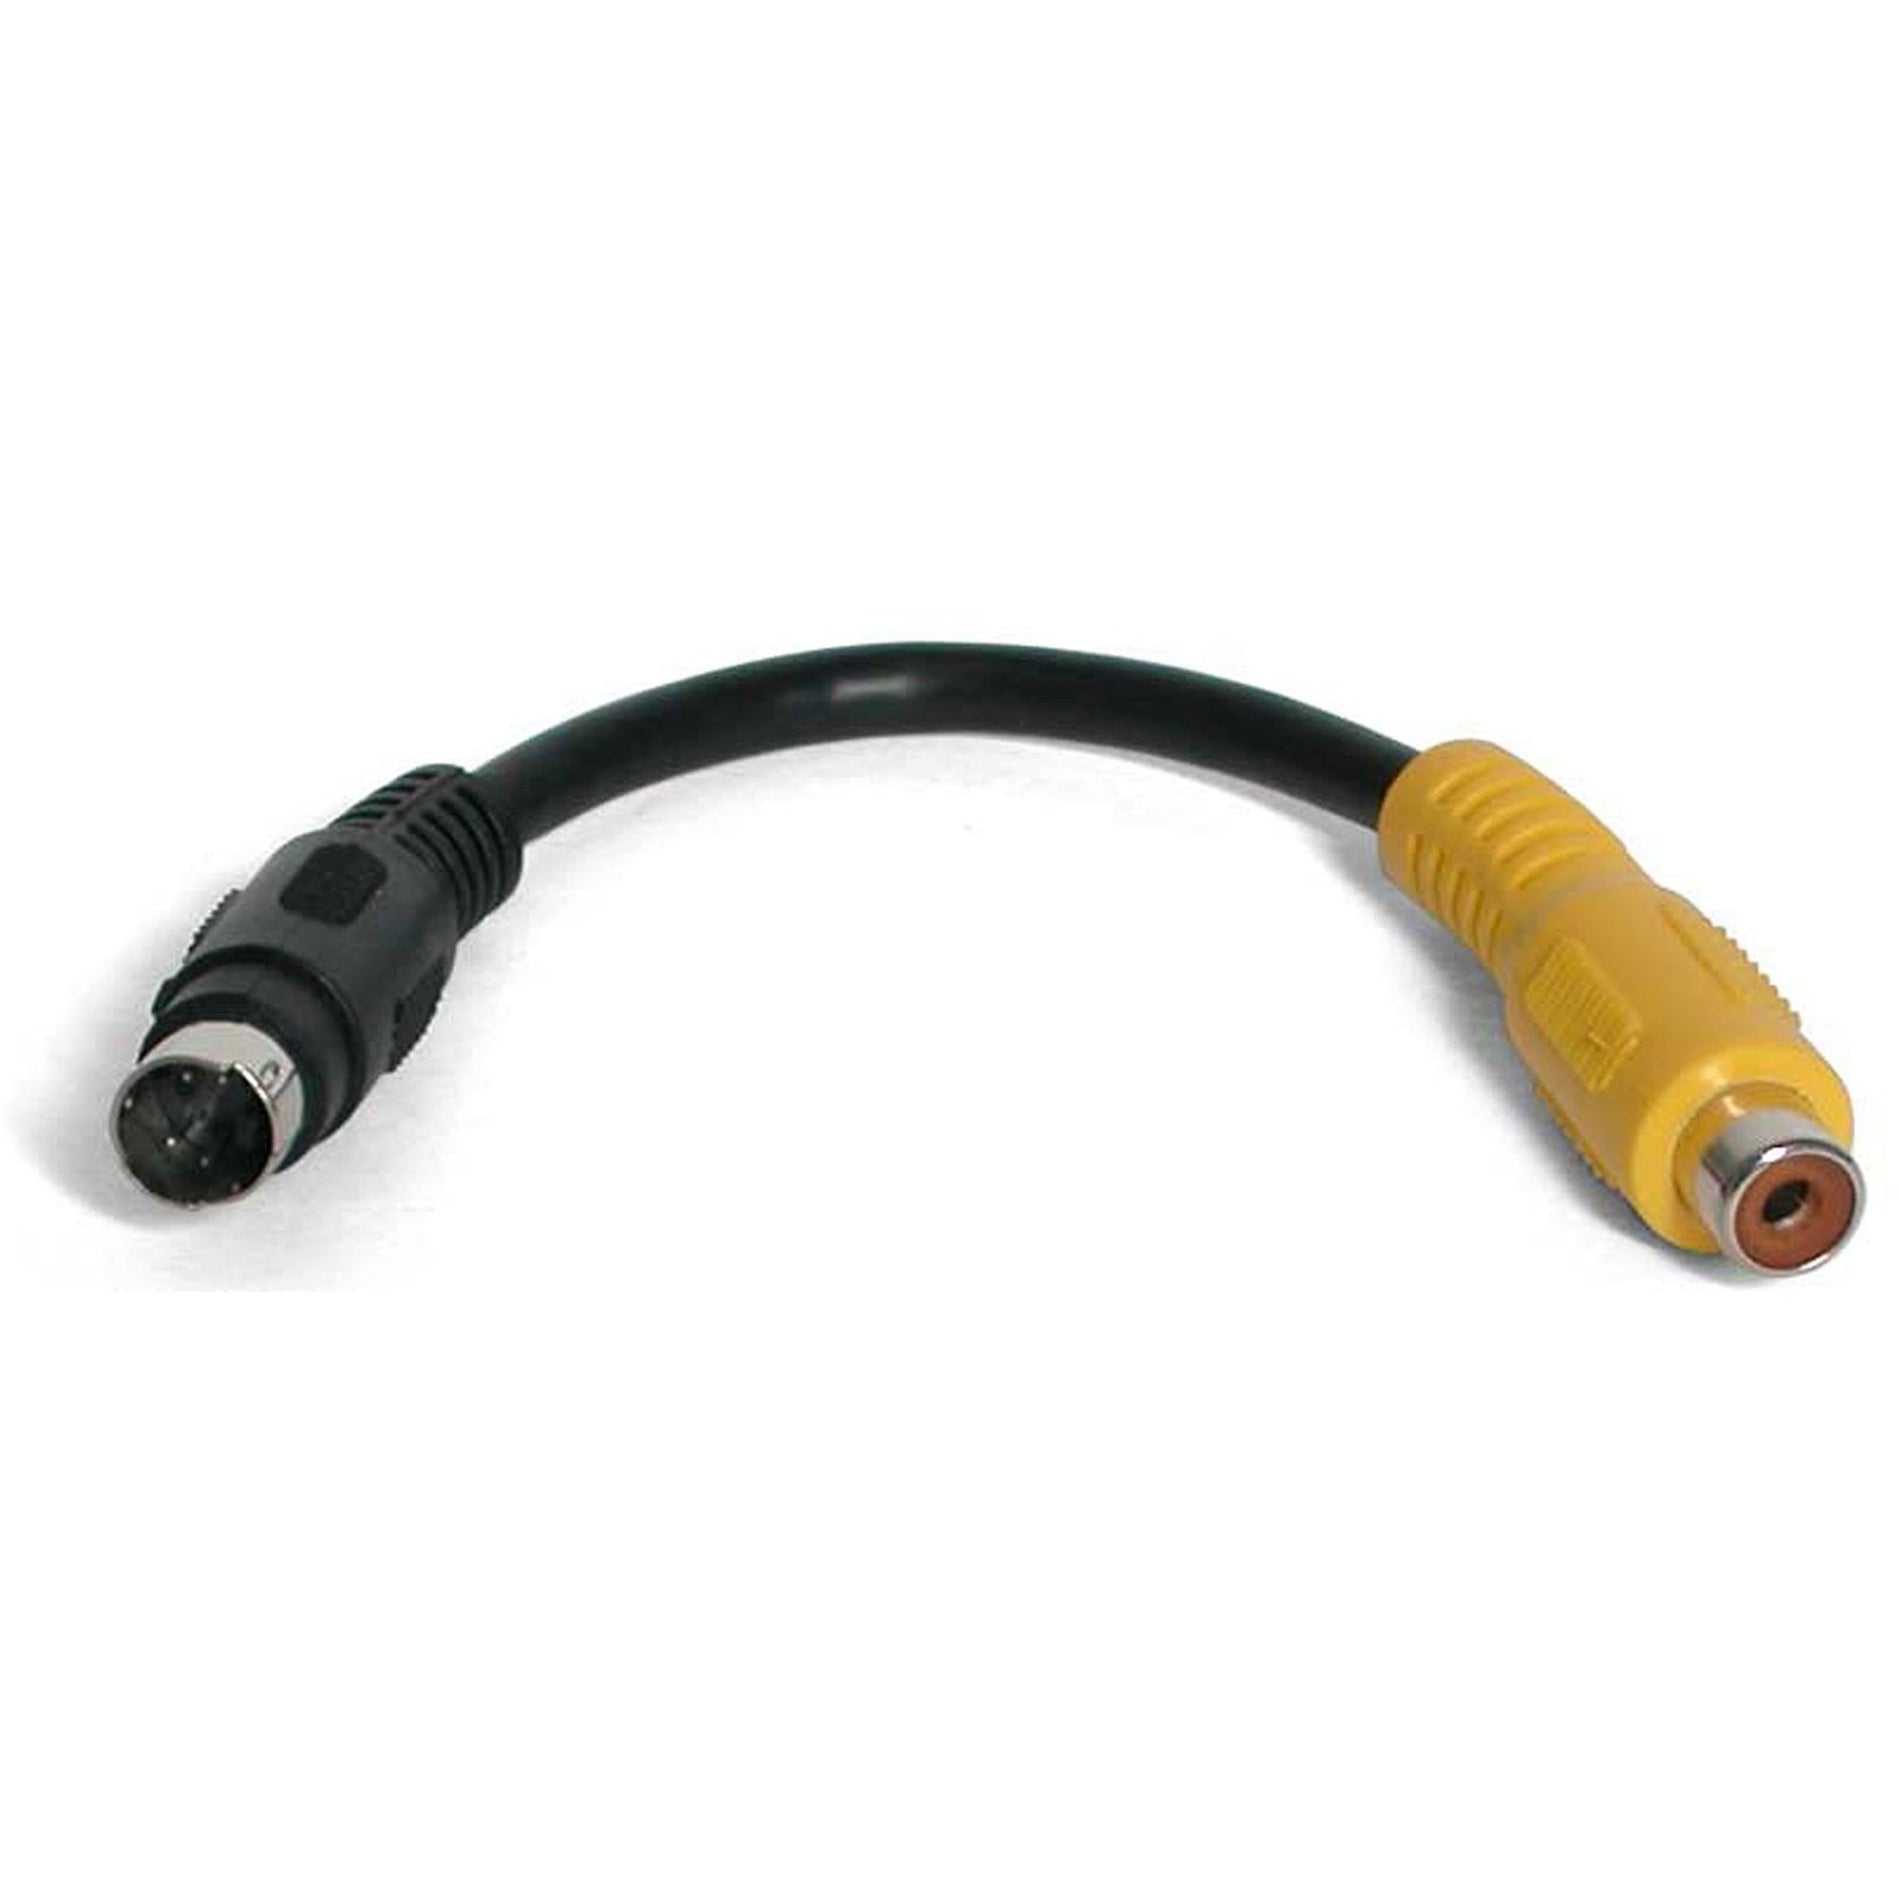 StarTech.com SVID2COMP 6in S-Video to Composite Video Adapter Cable, Stranded Copper, RCA/S-Video, Video Device, DVD, Camcorder, TV, Monitor, Computer, Notebook